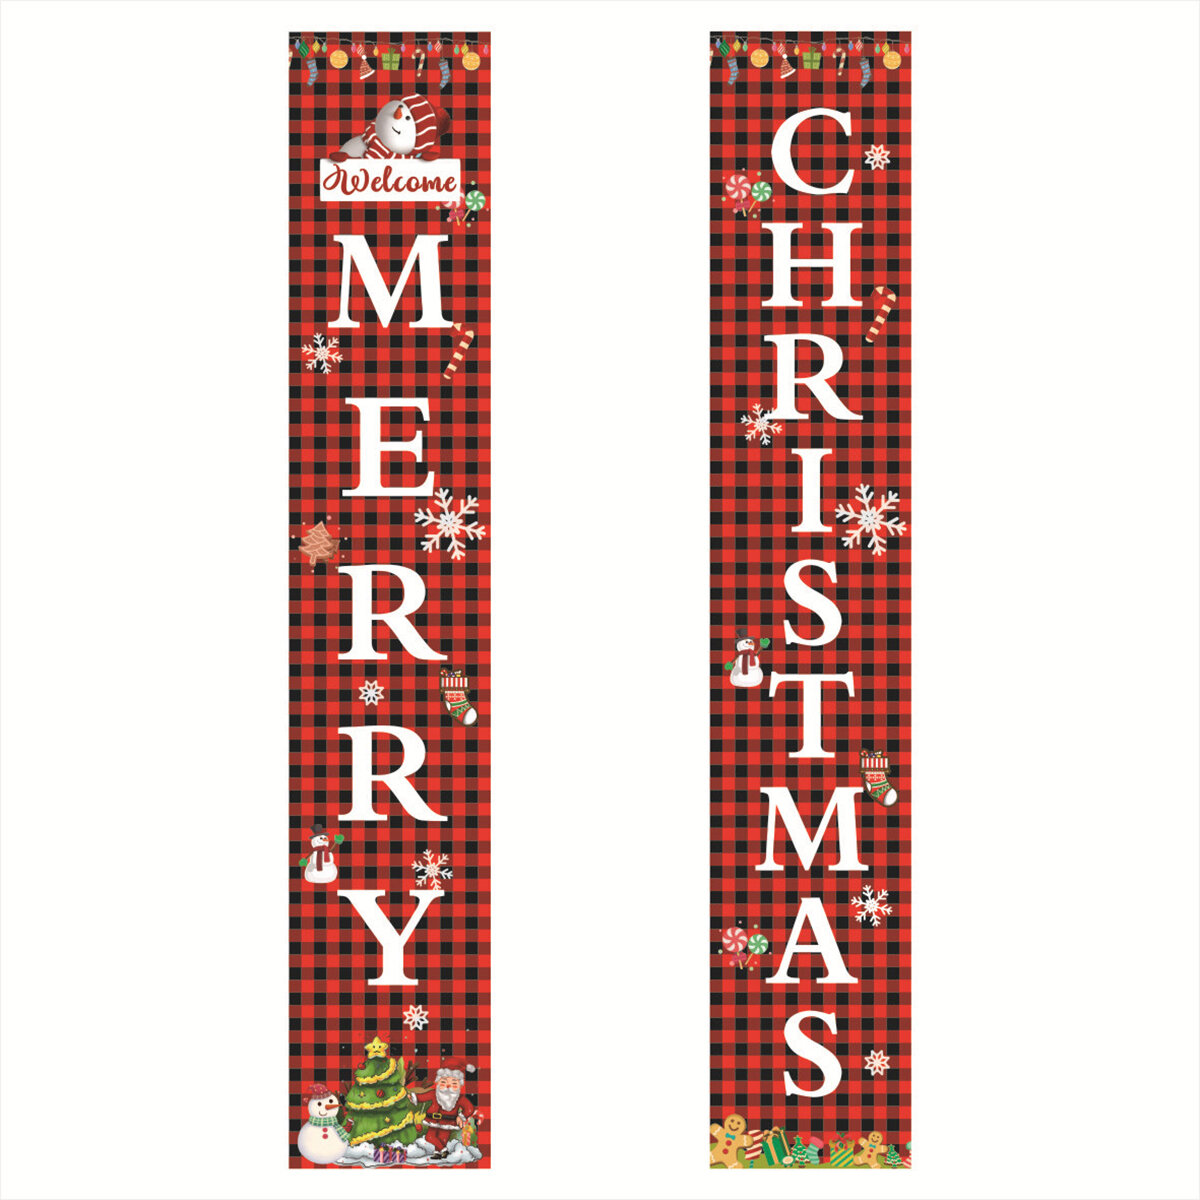 Merry Christmas Porch Banner Sign Door Banner Home Hanging Christmas Ornaments For Christmas Party D